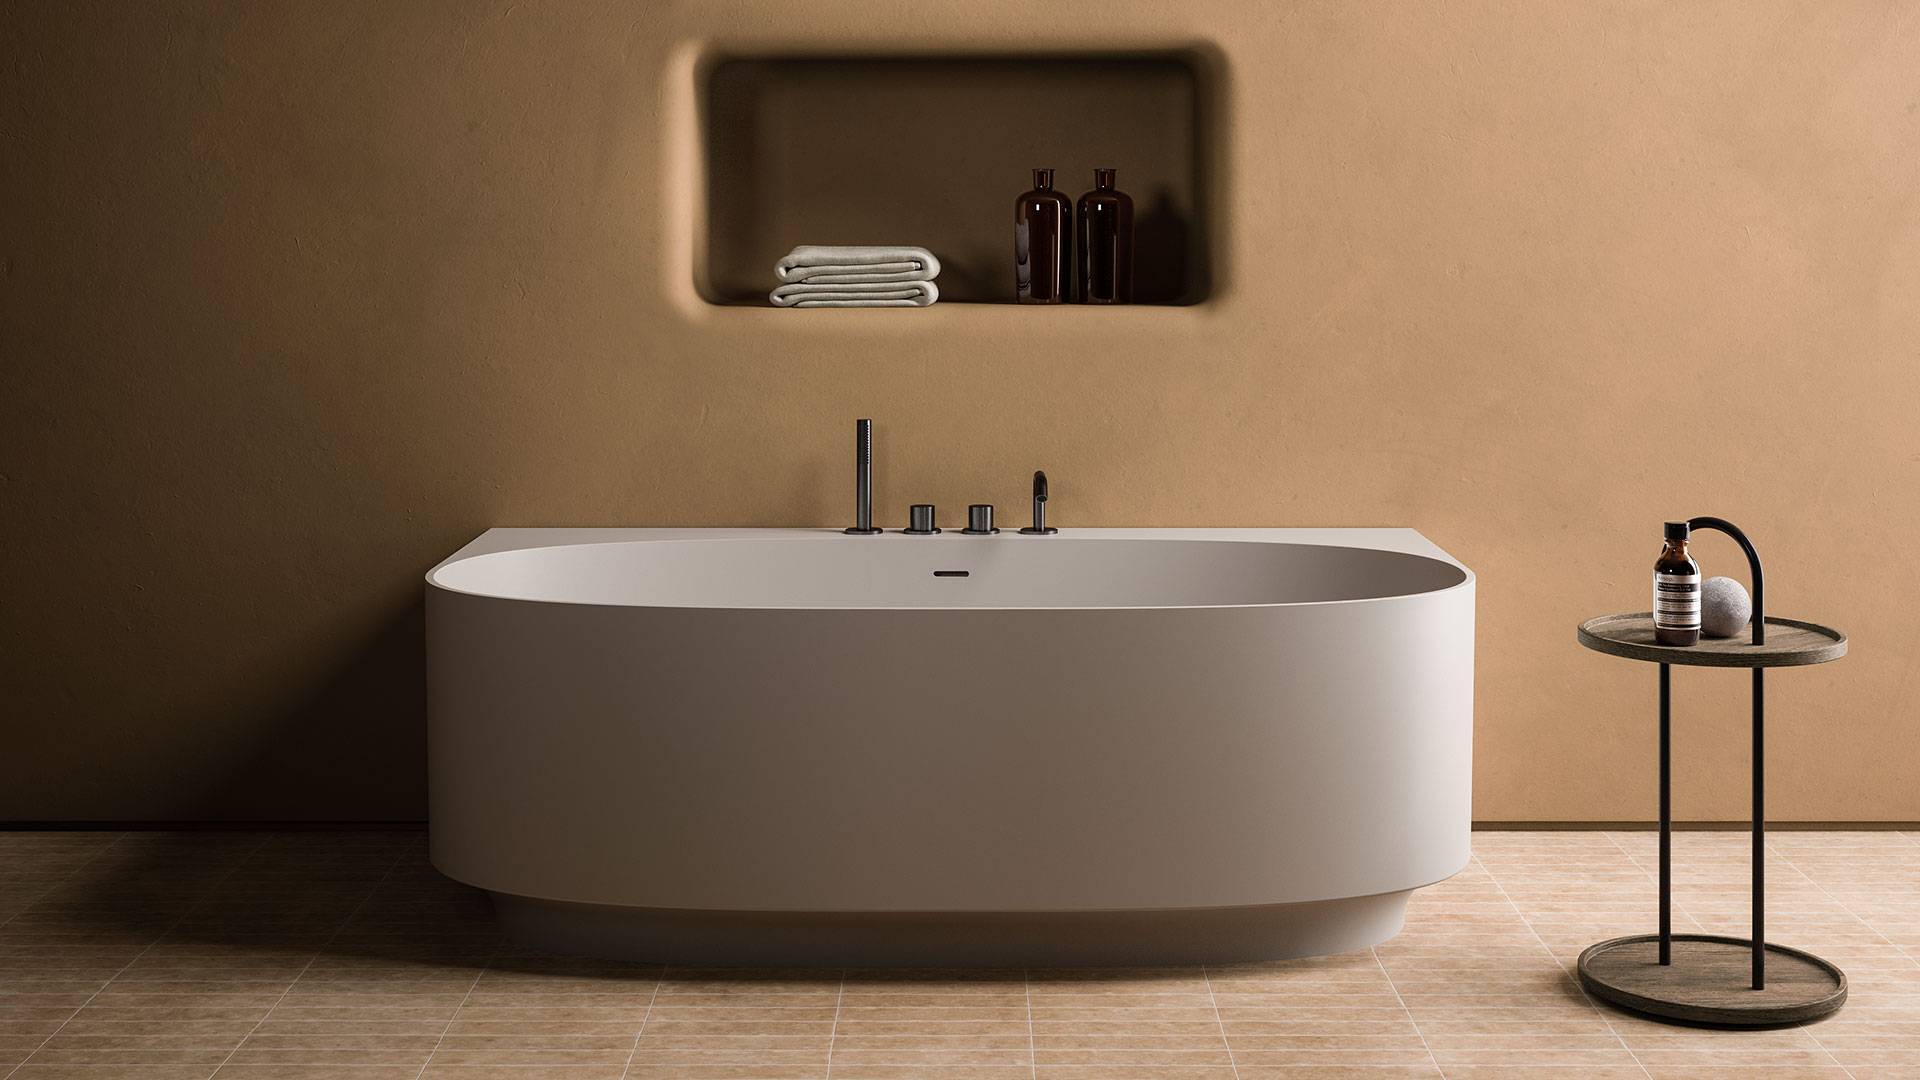 Arc160 wall mounted bathtub in UHS Colour 